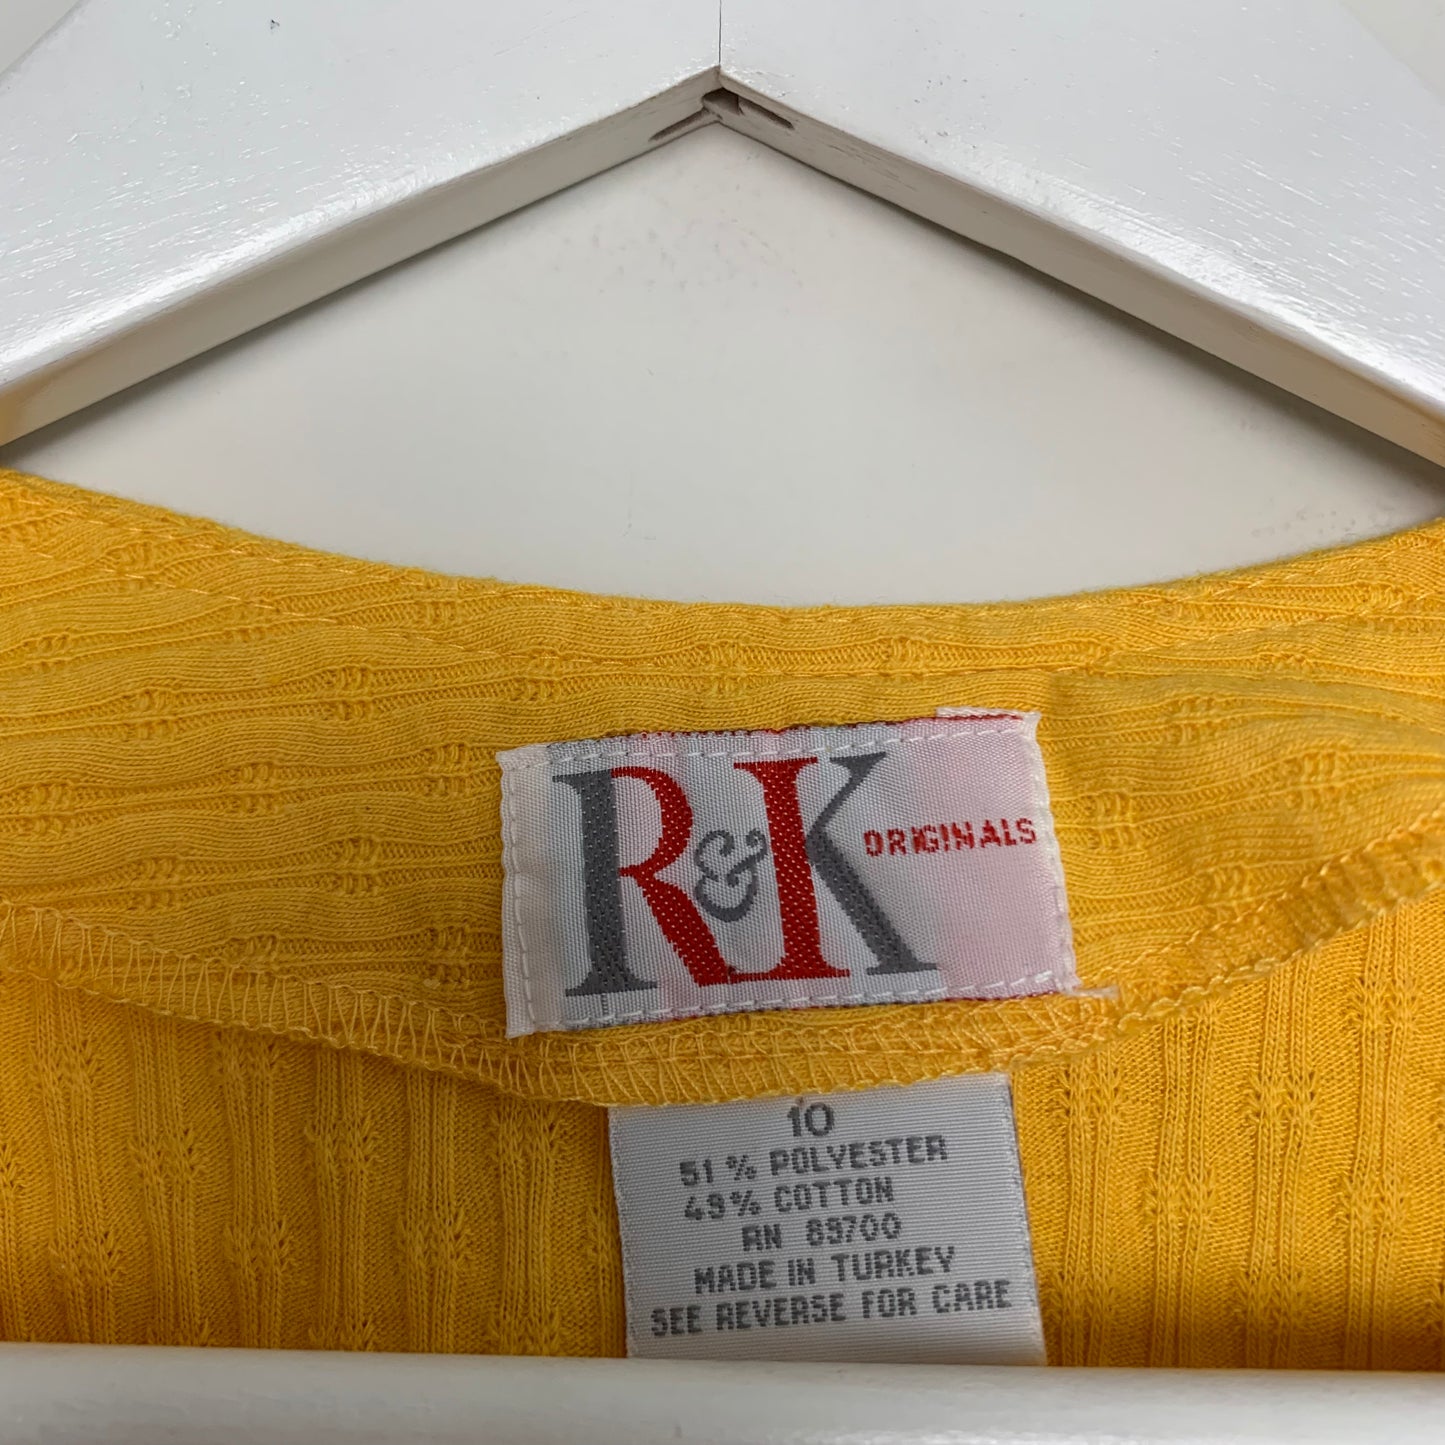 90s R&K Originals Yellow Cropped Blouse Shell button Down 10